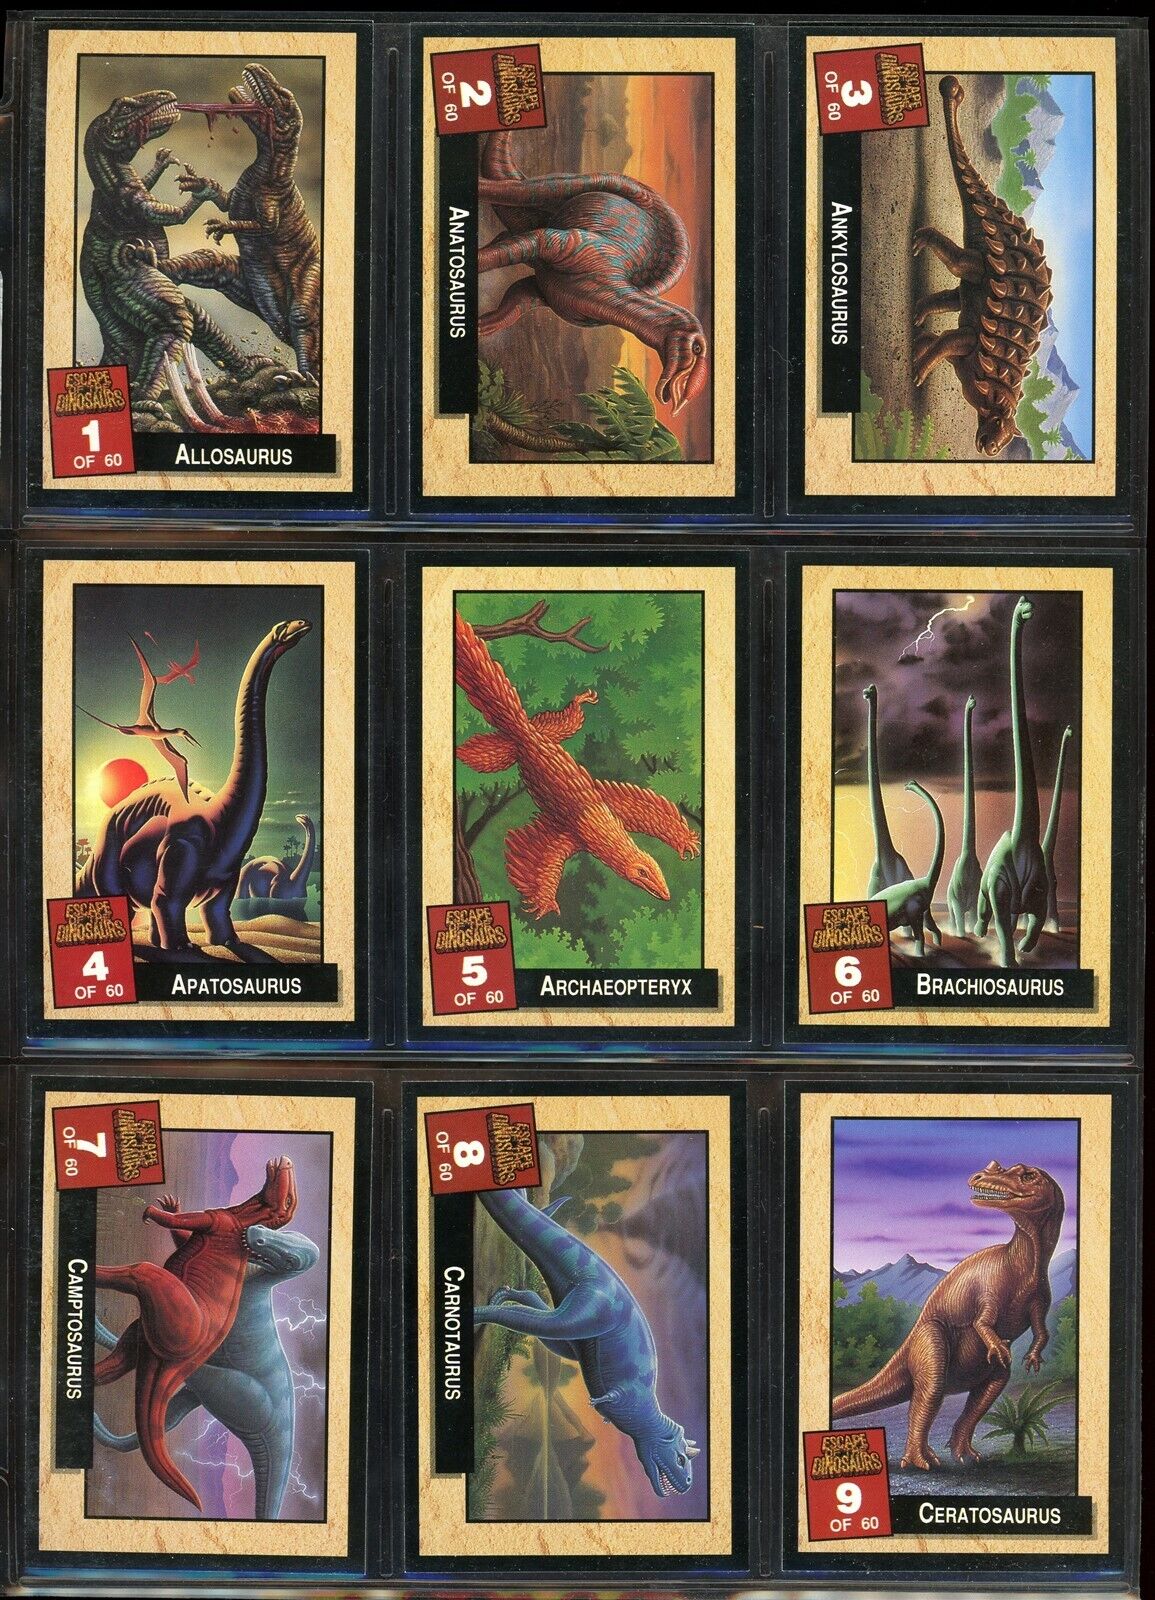 1993 Dynamic Marketing Escape of the Dinosaurs Complete Card Set (1-60) B1